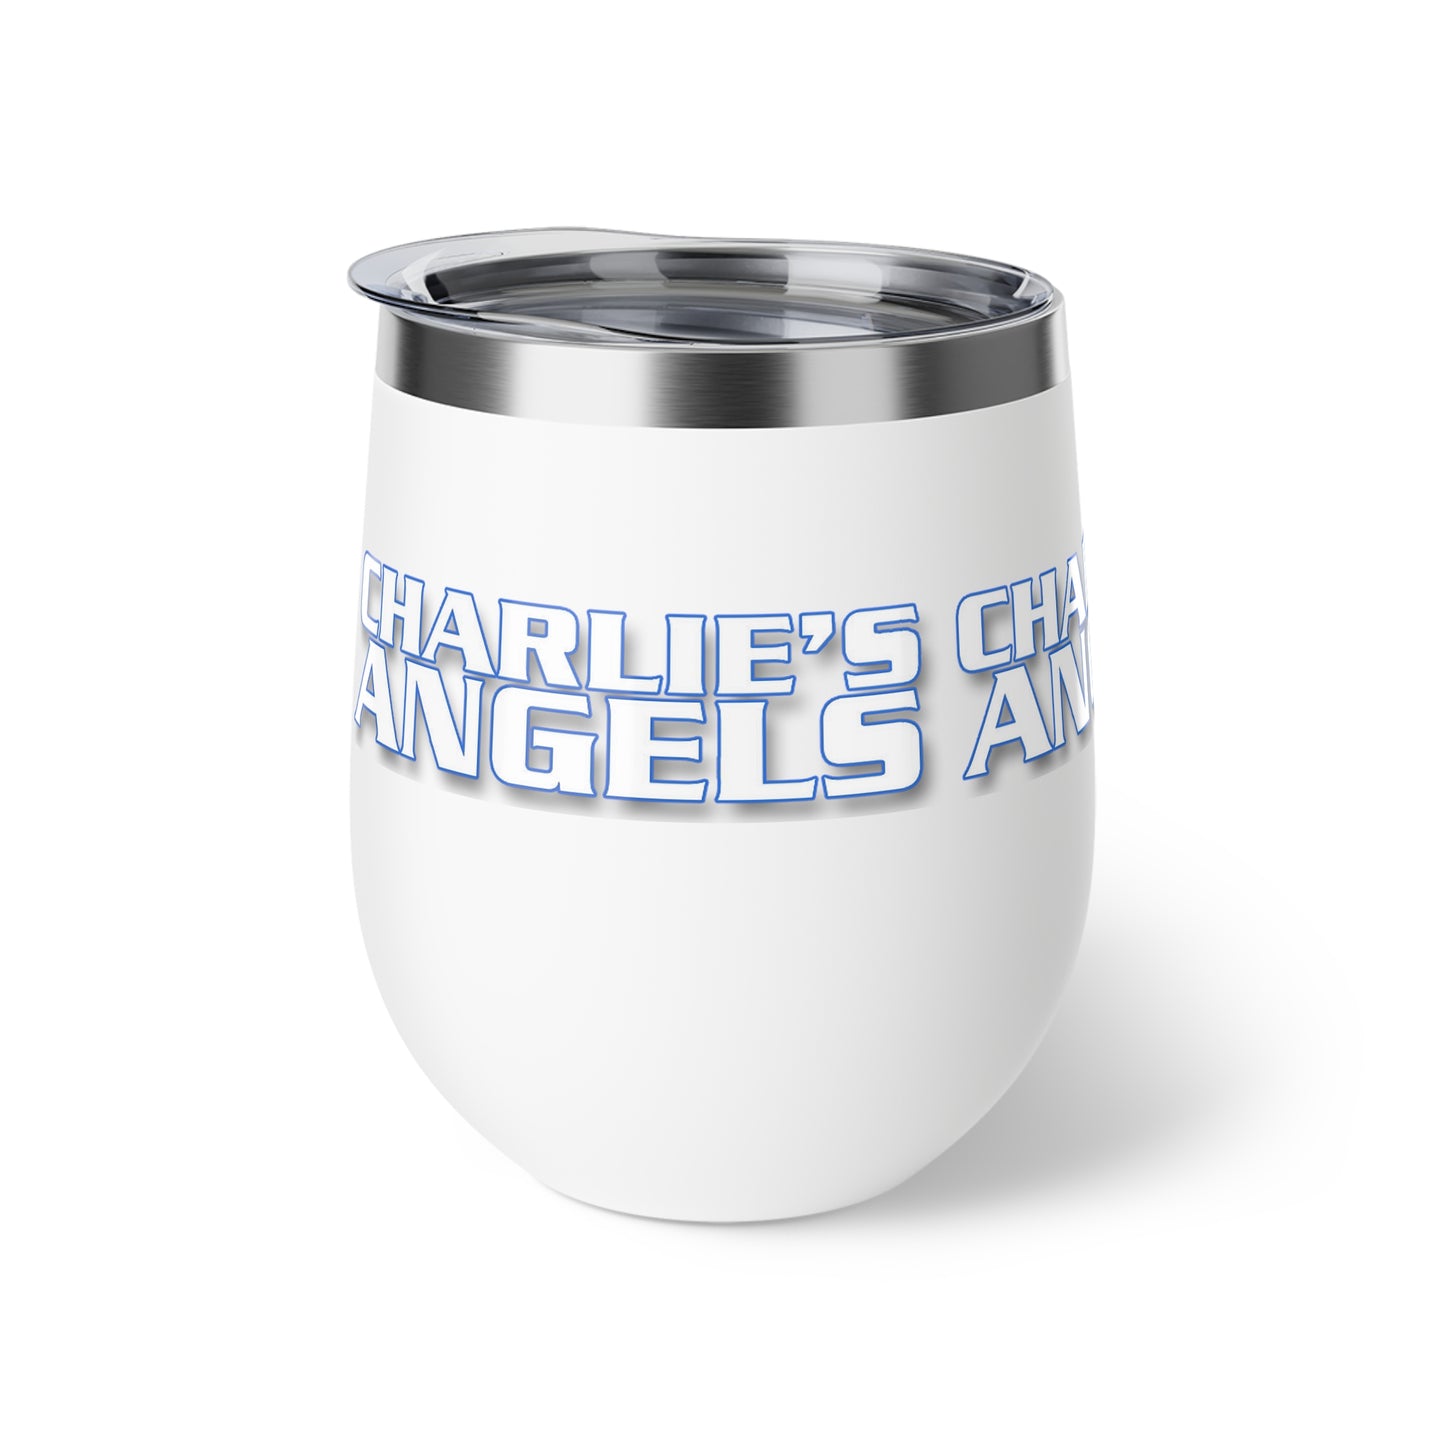 CHARLIES ANGELS TV Show Copper Vacuum Insulated Cup 12oz